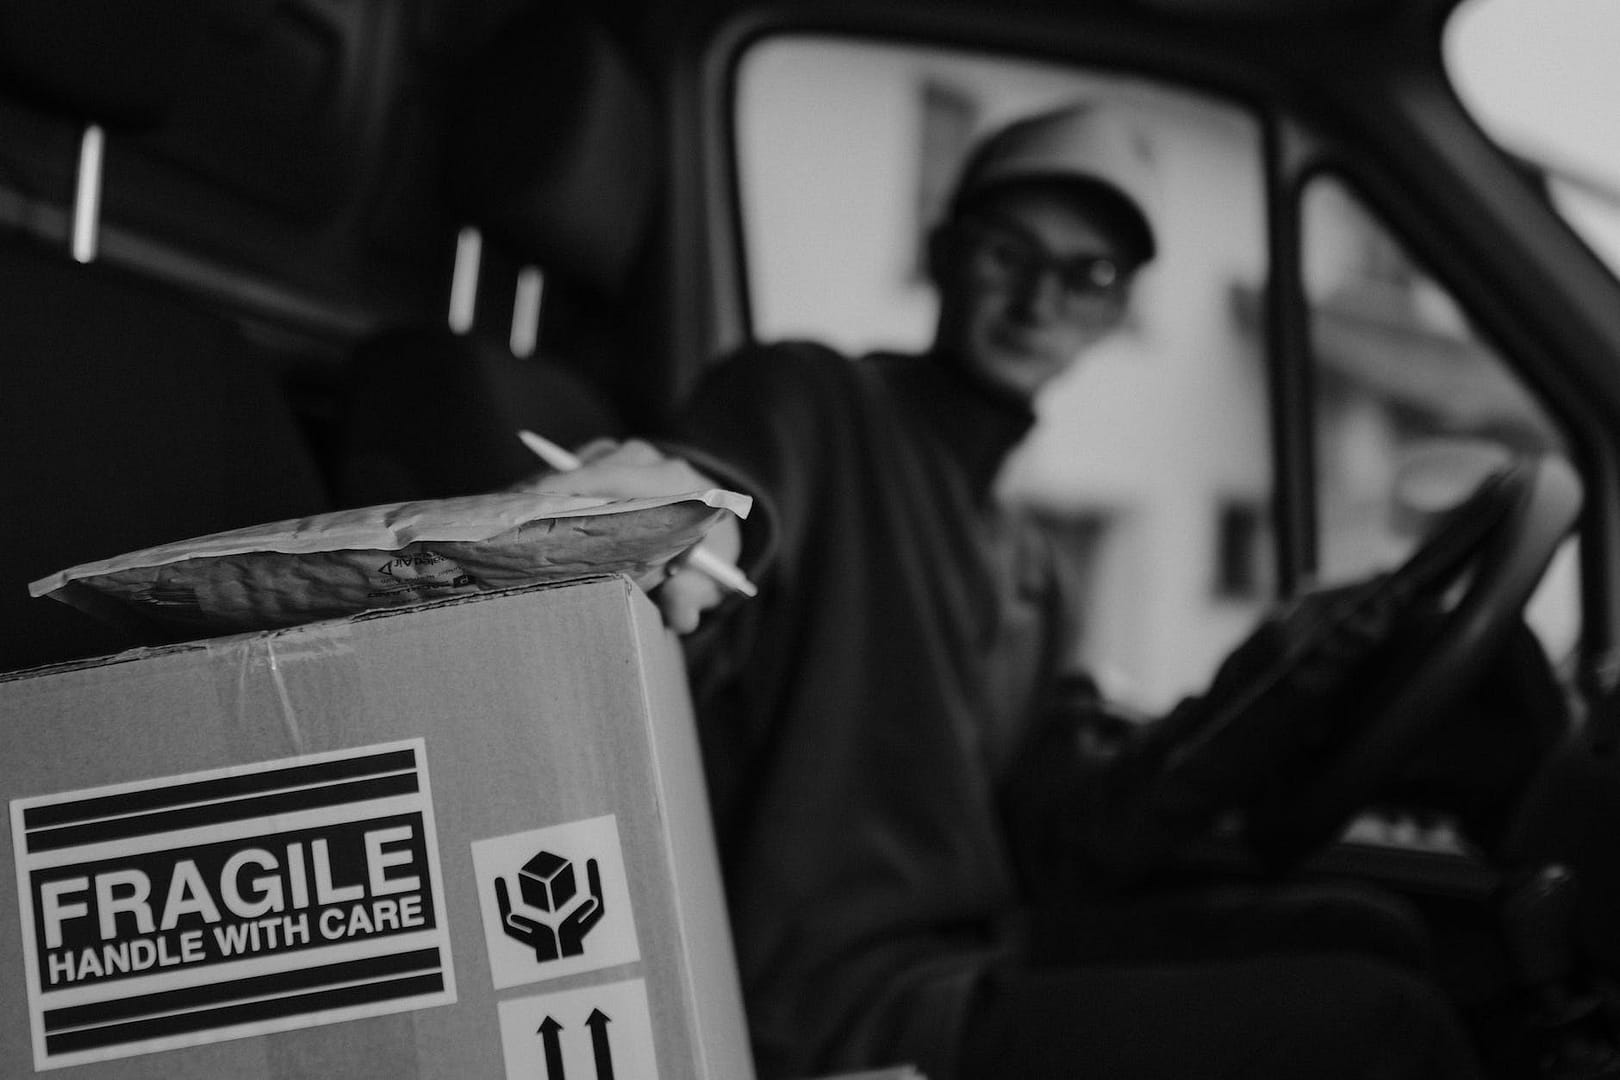 monochrome photo of man getting a parcel on top of carton box